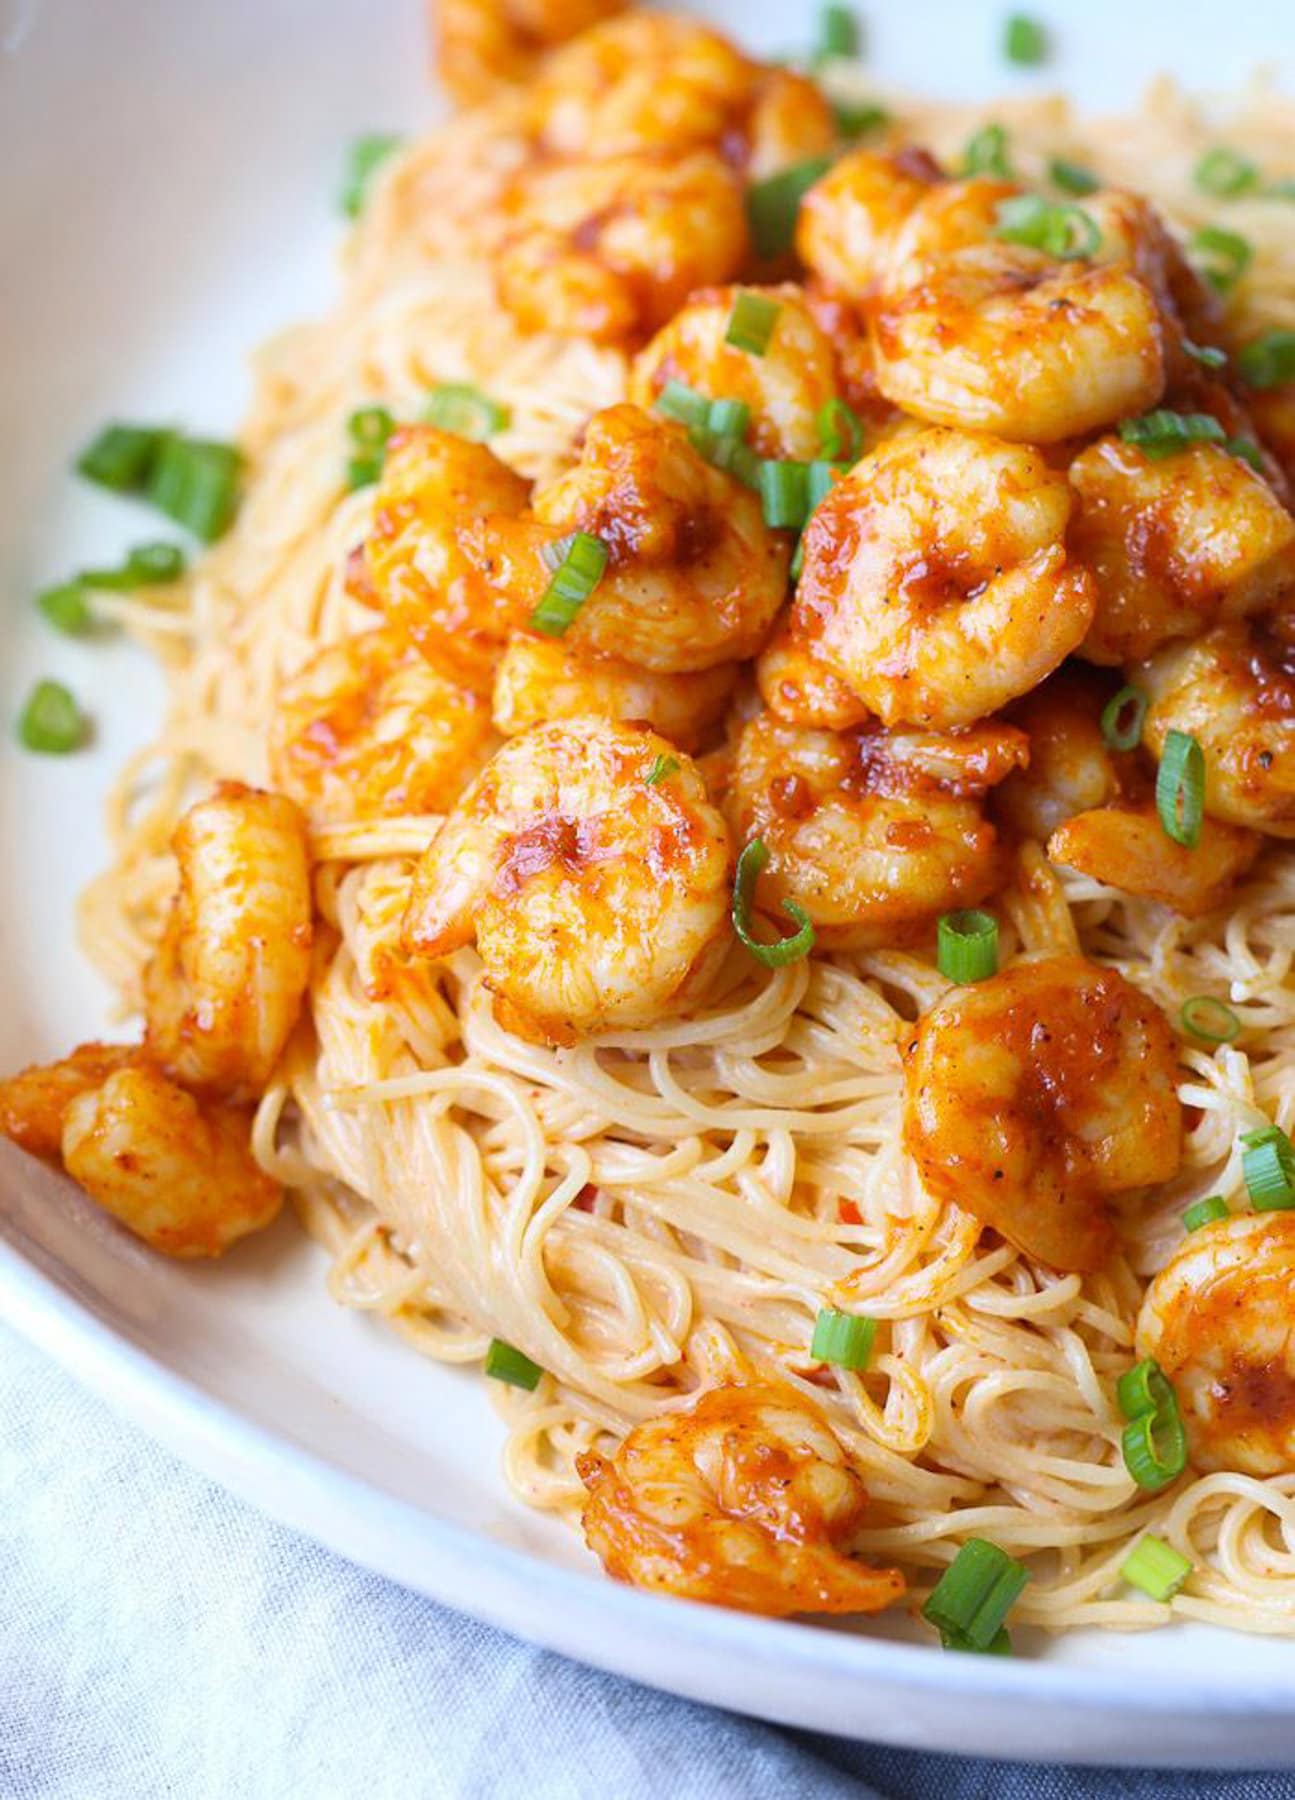 Spicy Chicken and Shrimp served on noodles